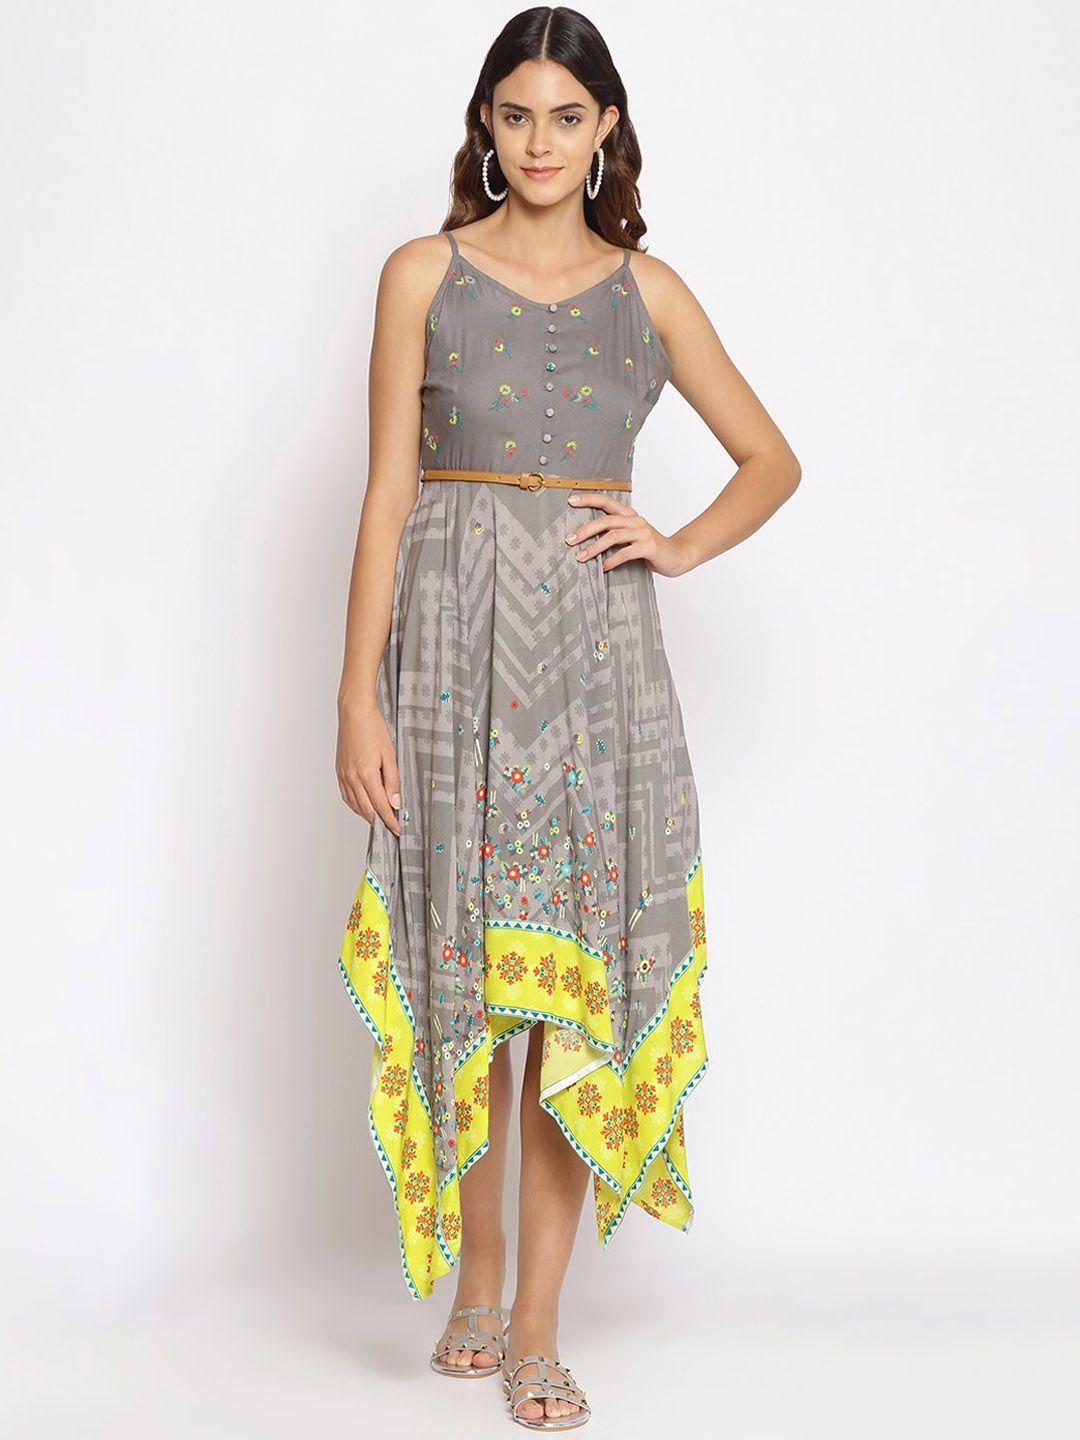 oxolloxo women grey & yellow printed fit and flare dress